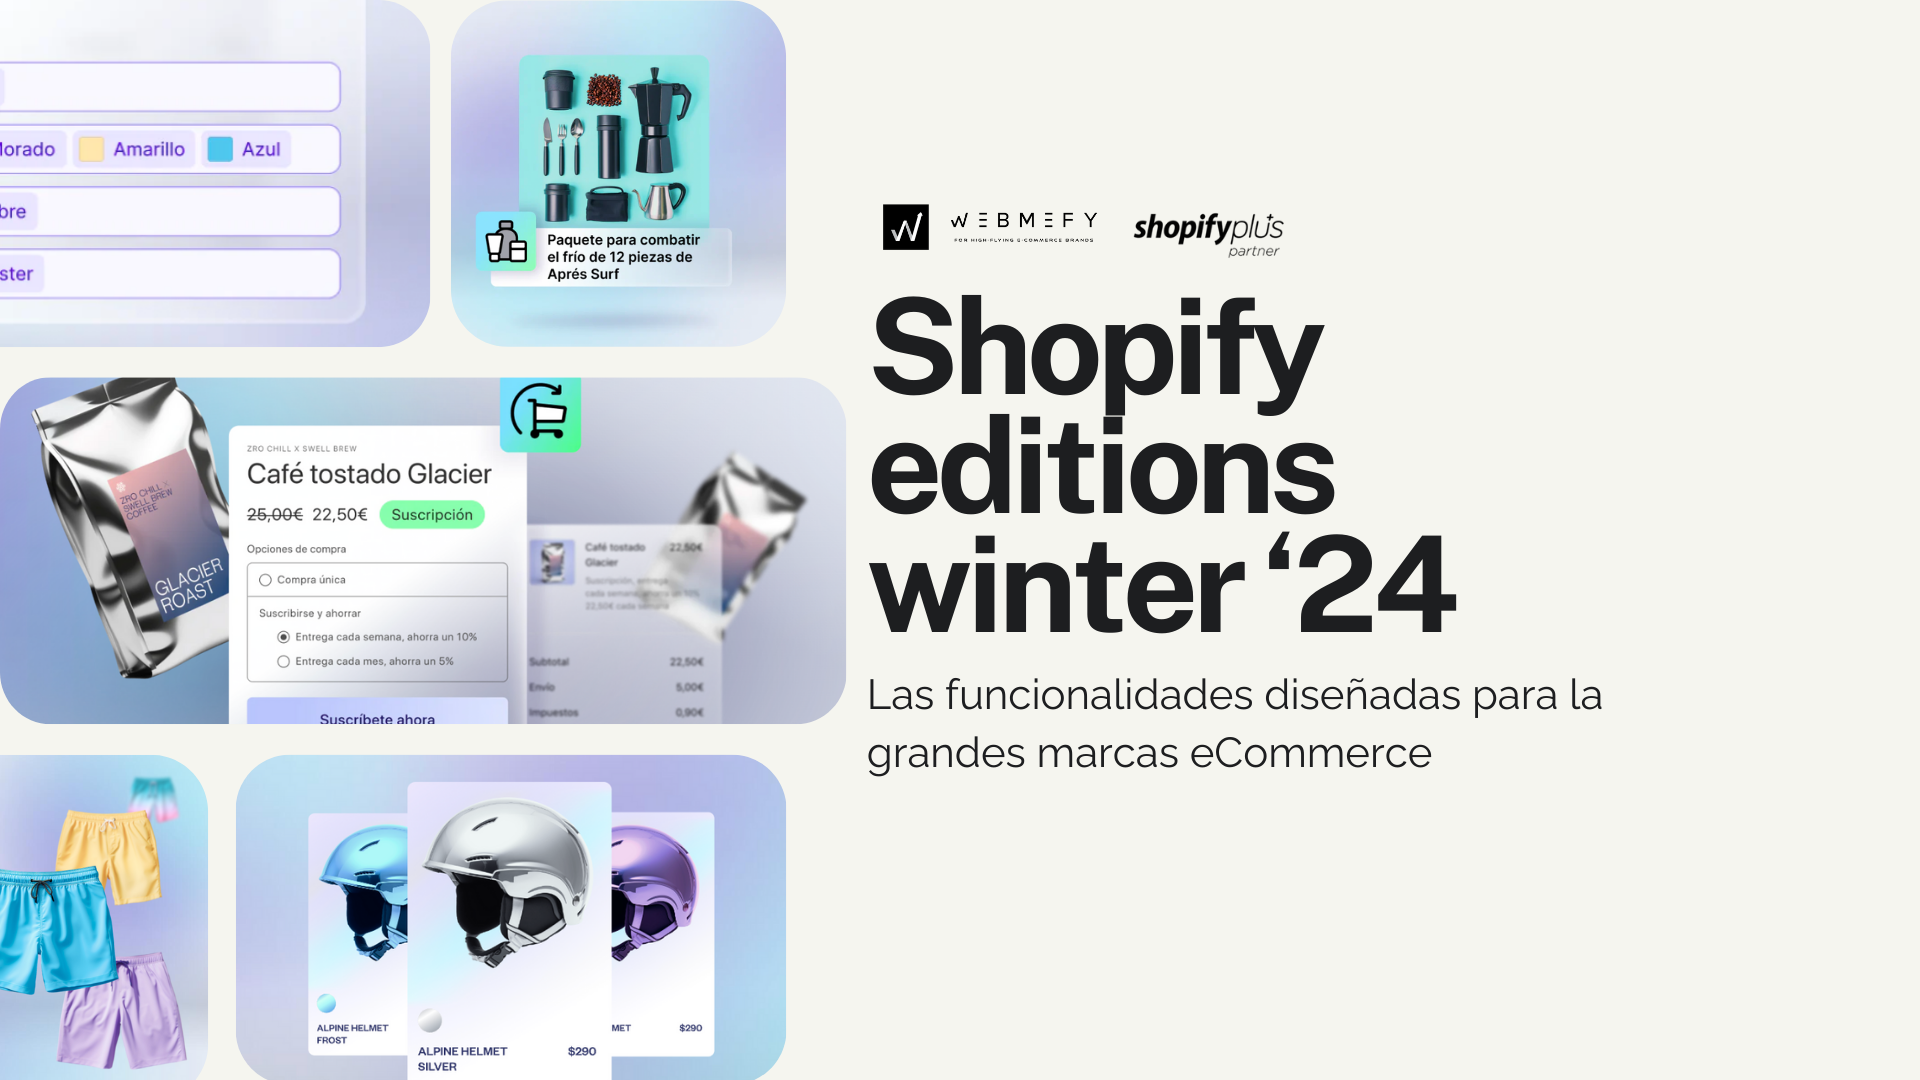 Shopify editions winter 24'